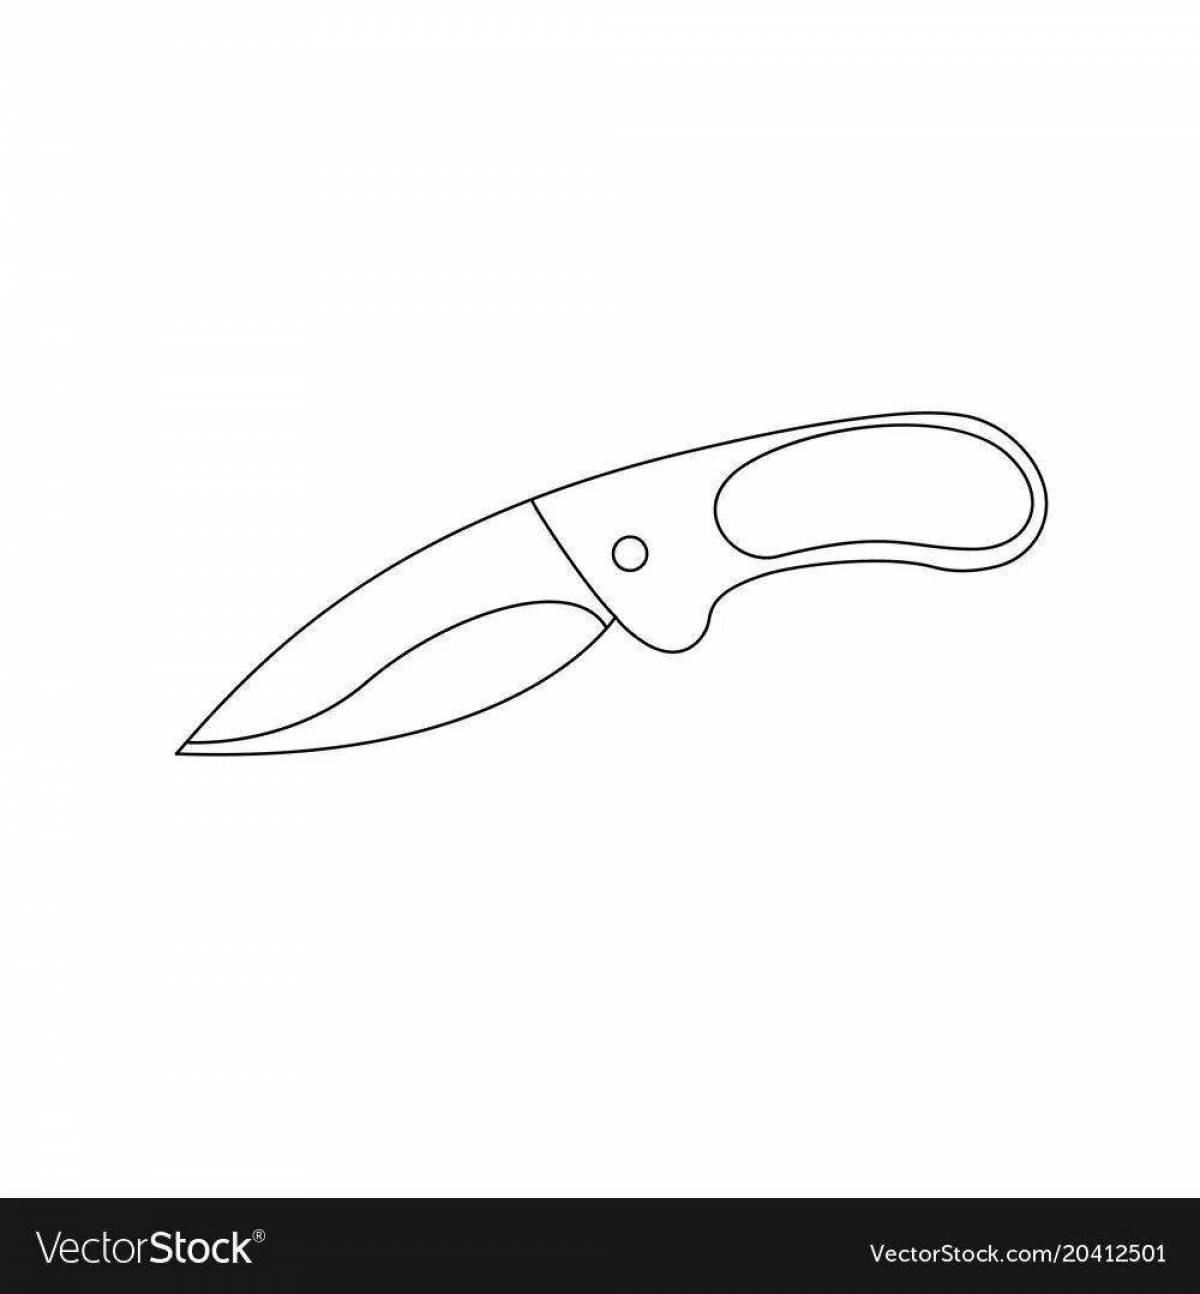 Awesome scorpion knife coloring page from standoff 2